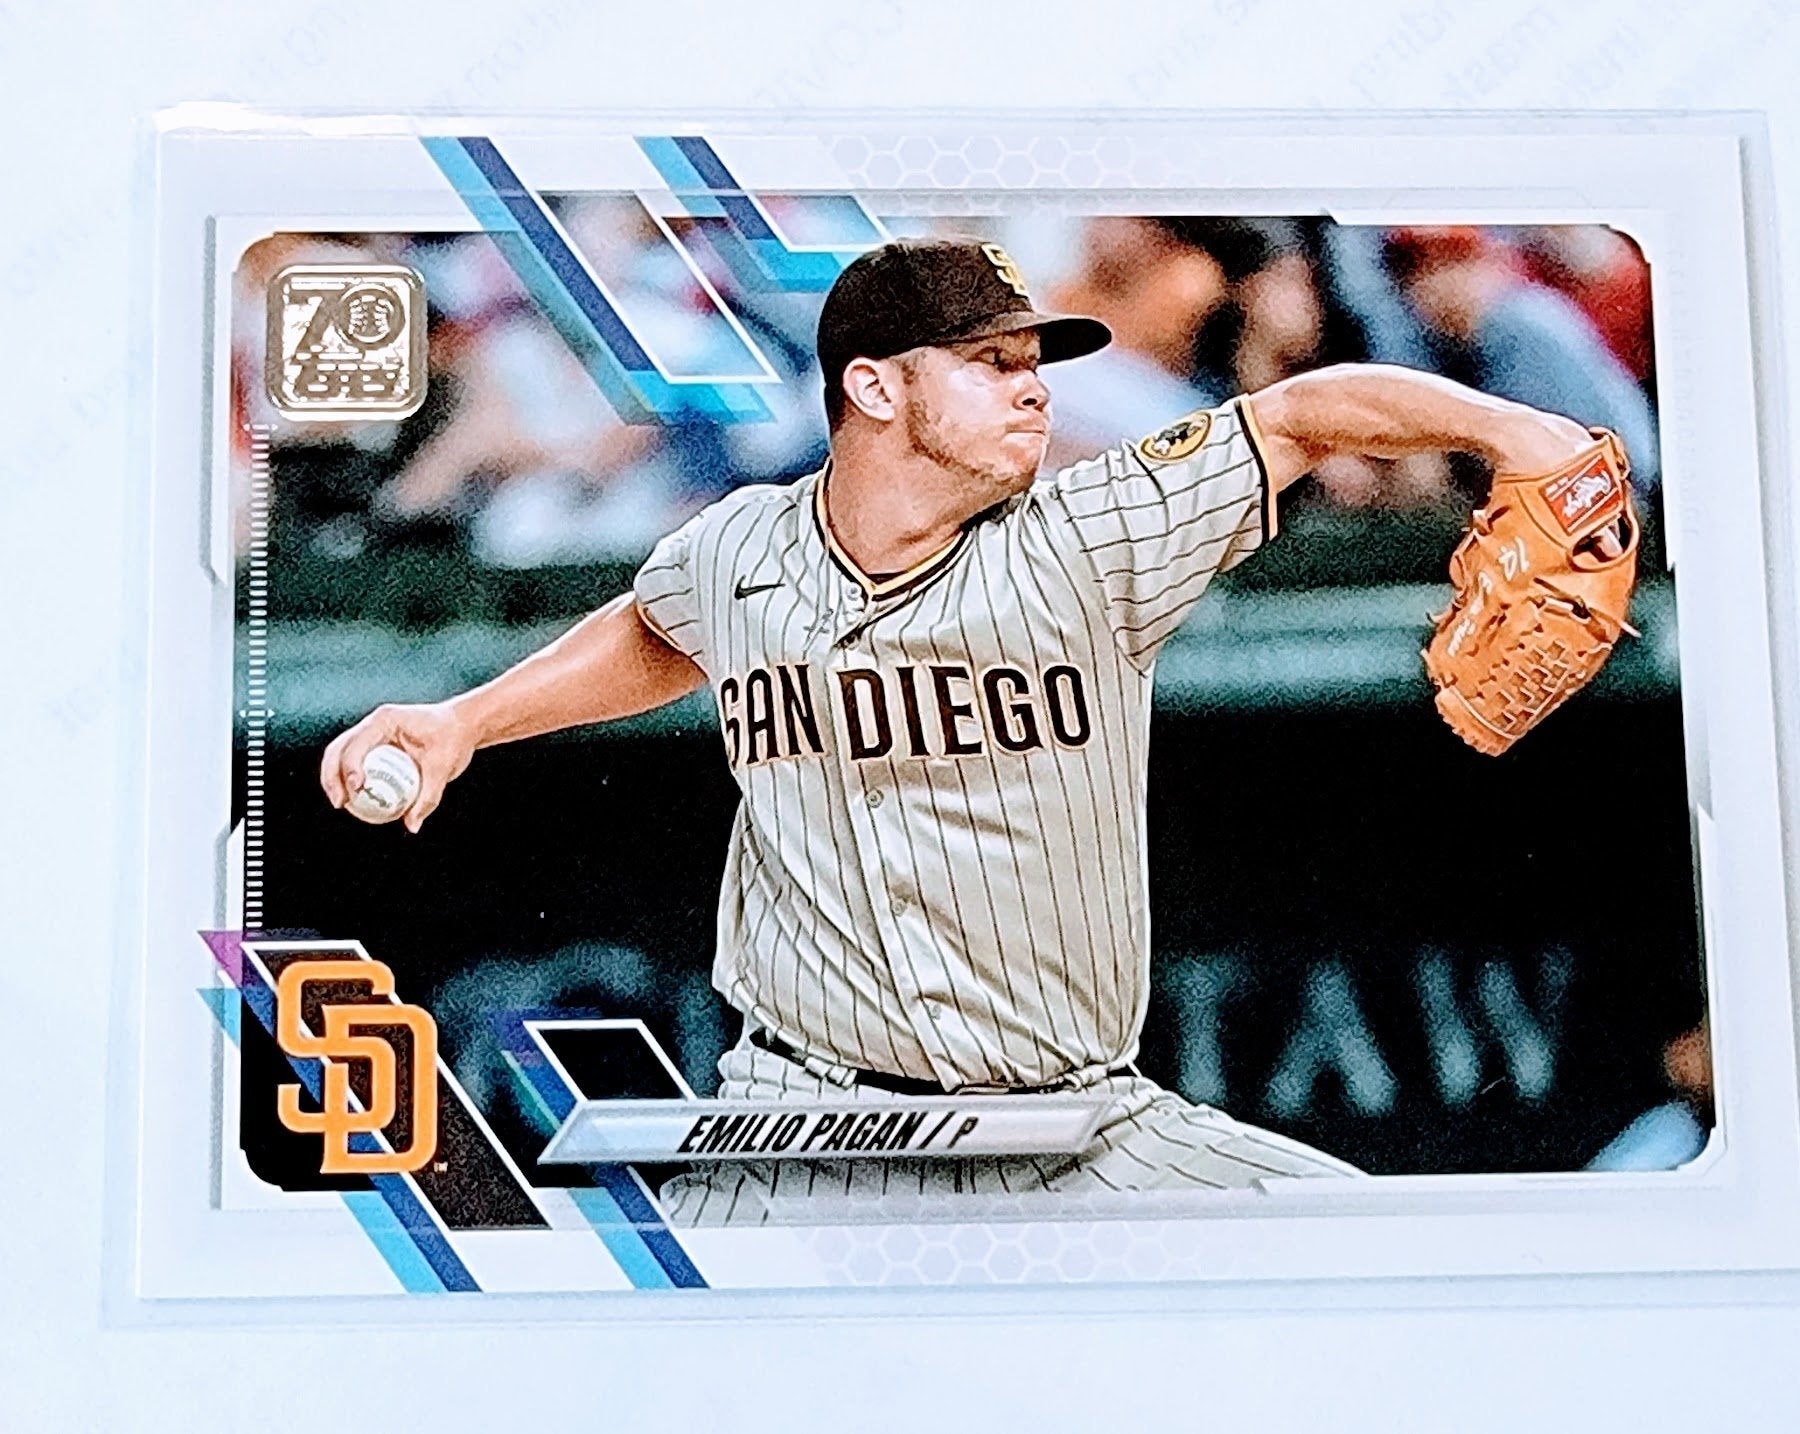 2021 Topps Update Emilio Pagan Baseball Trading Card SMCB1 simple Xclusive Collectibles   